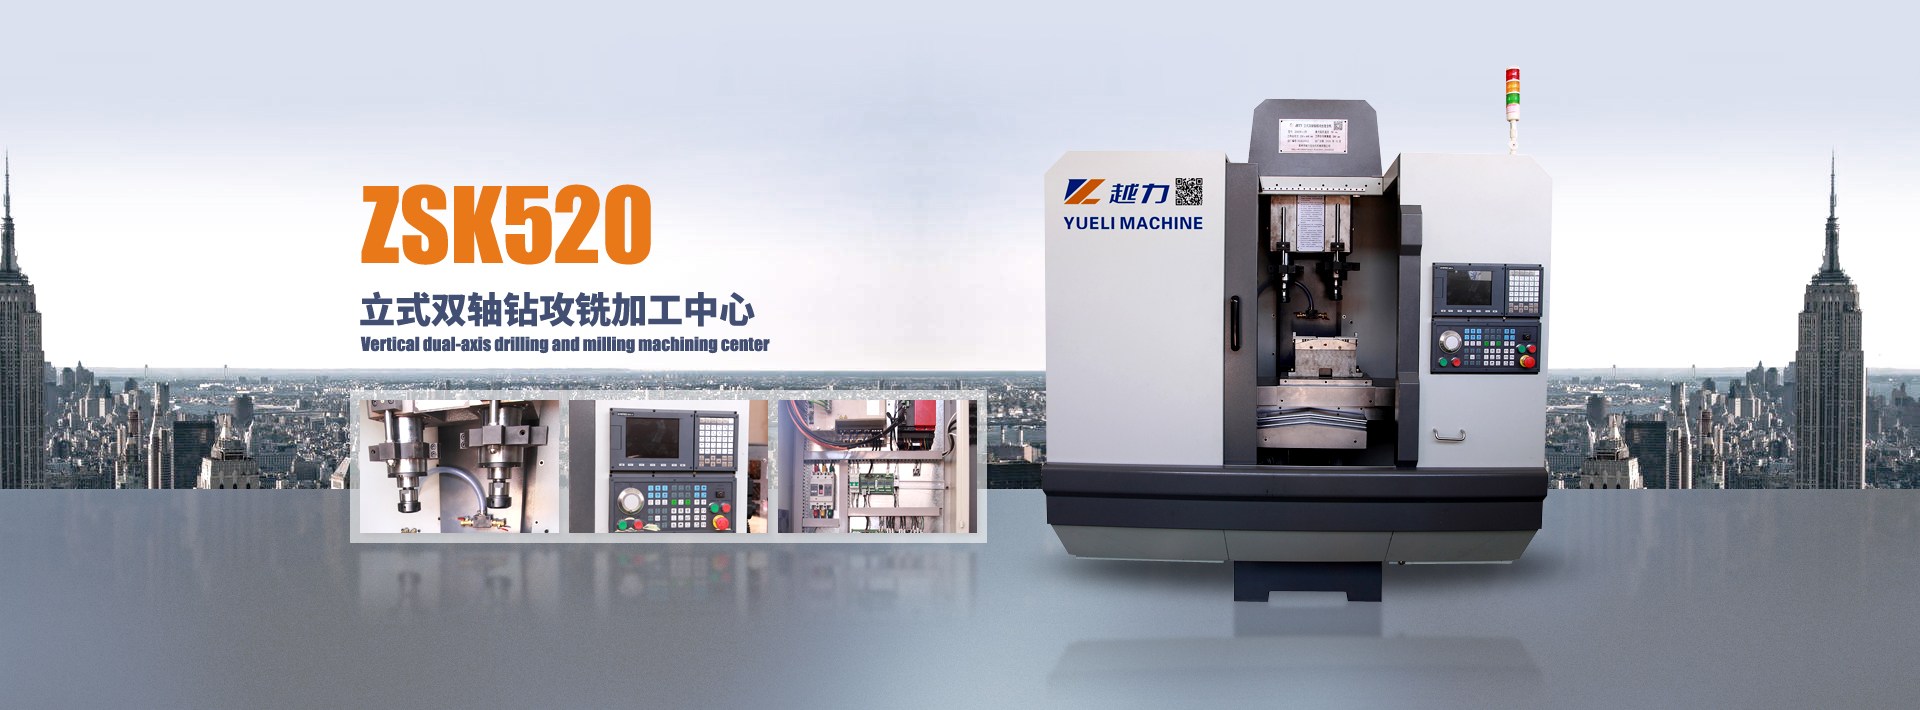 Vertical ducal-axis drilling and milling machining center